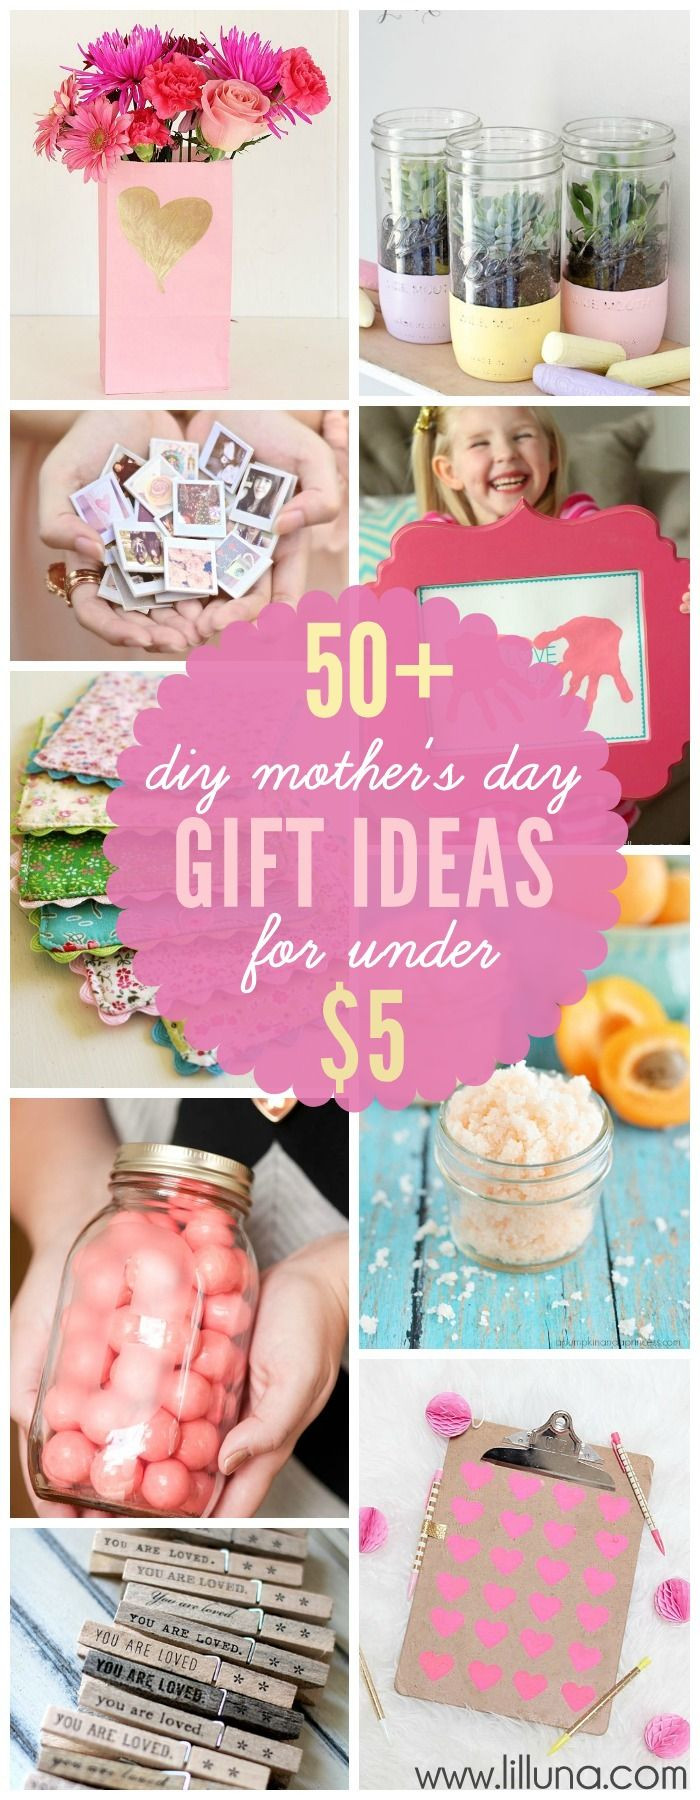 Best Mothers Day Gift Ideas
 198 best images about Mother s Day Gift Ideas on Pinterest